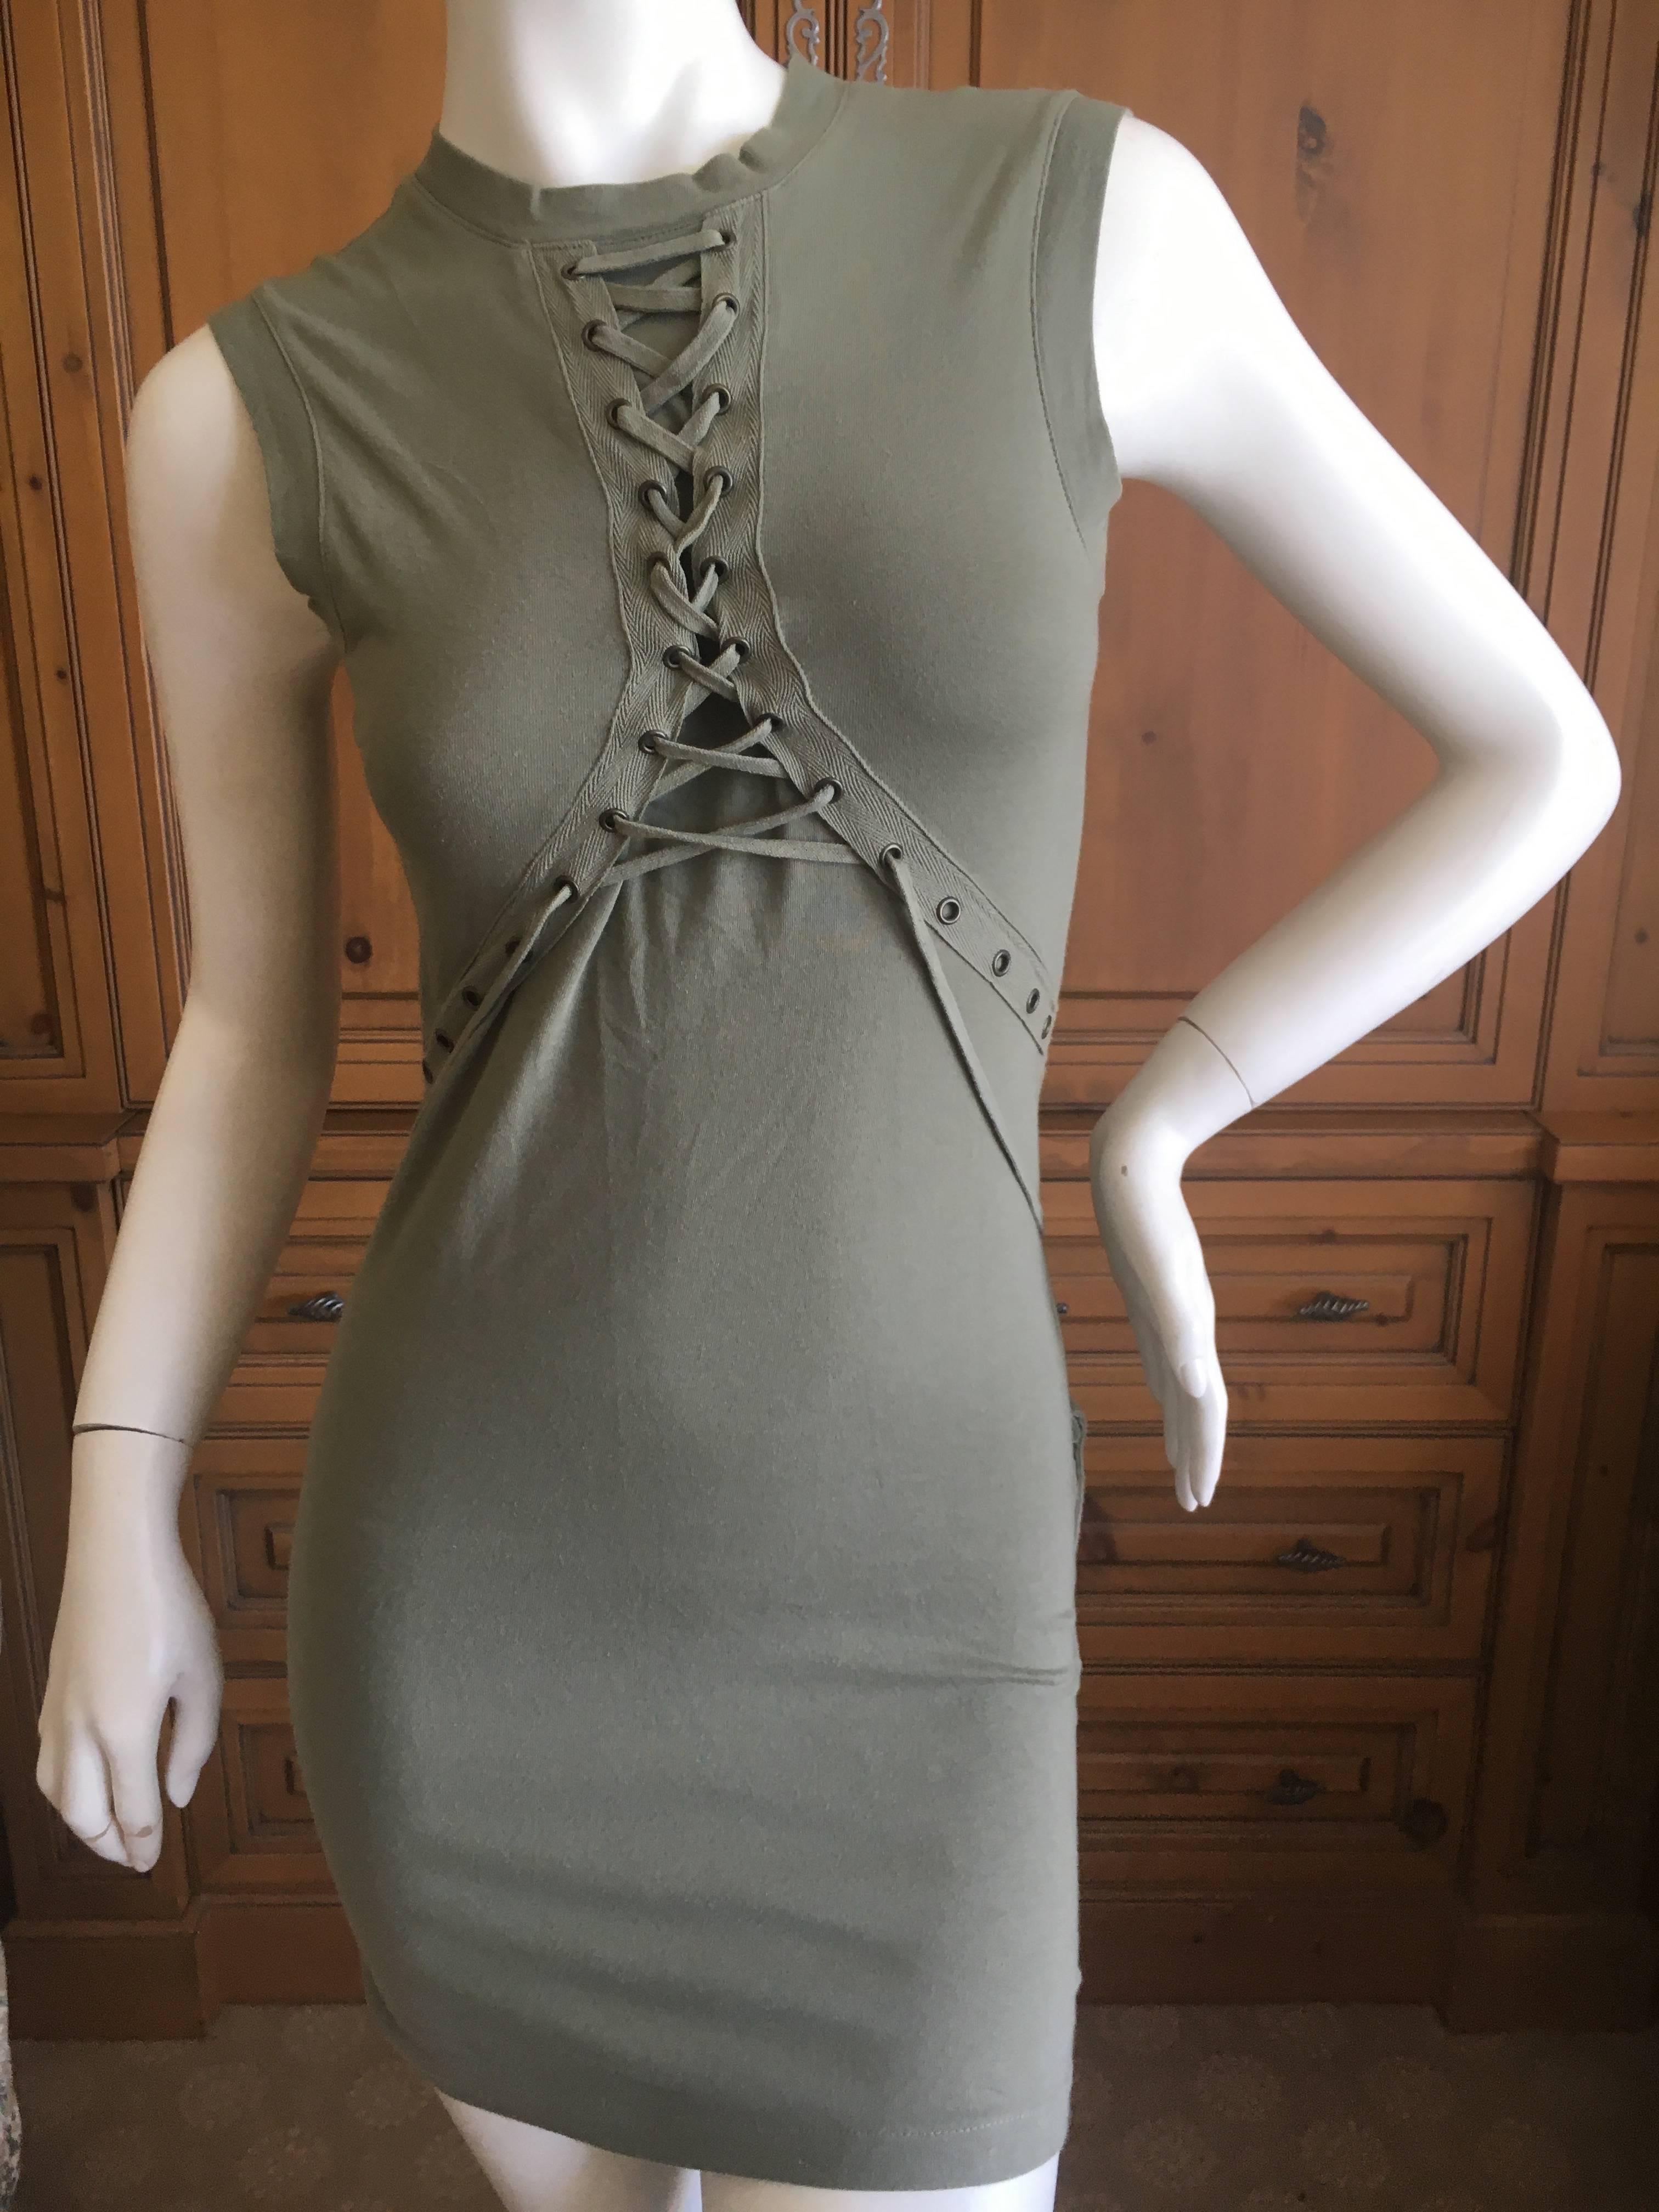 Christian Dior by John Galliano Military Green Mini Dress Corset Lace Details.
This is a wonderful lightweight dress, made of cotton , like tee shirt fabric.
Size 36
Bust 36